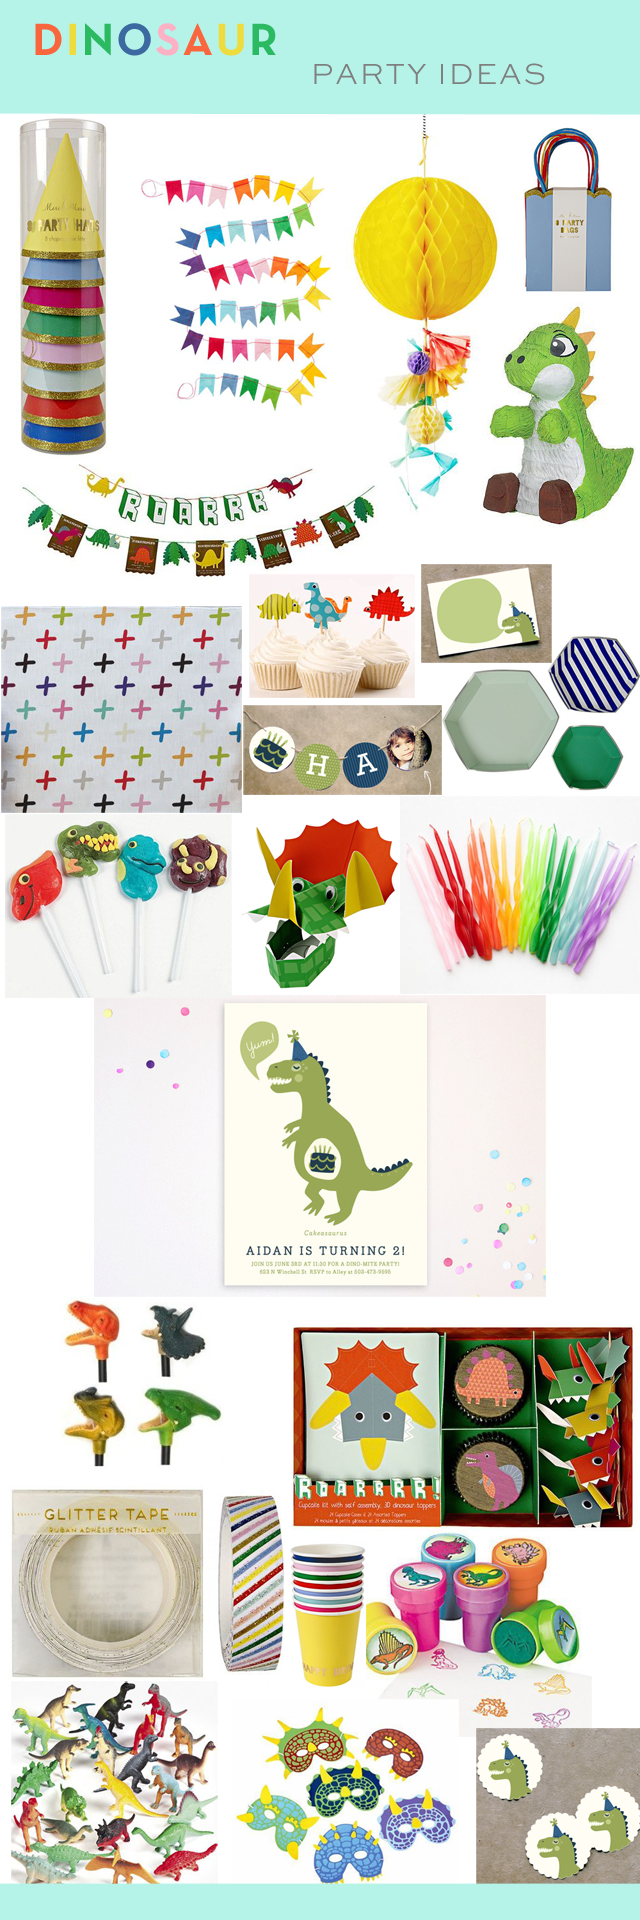 Dinosaur Party Inspiration and Ideas